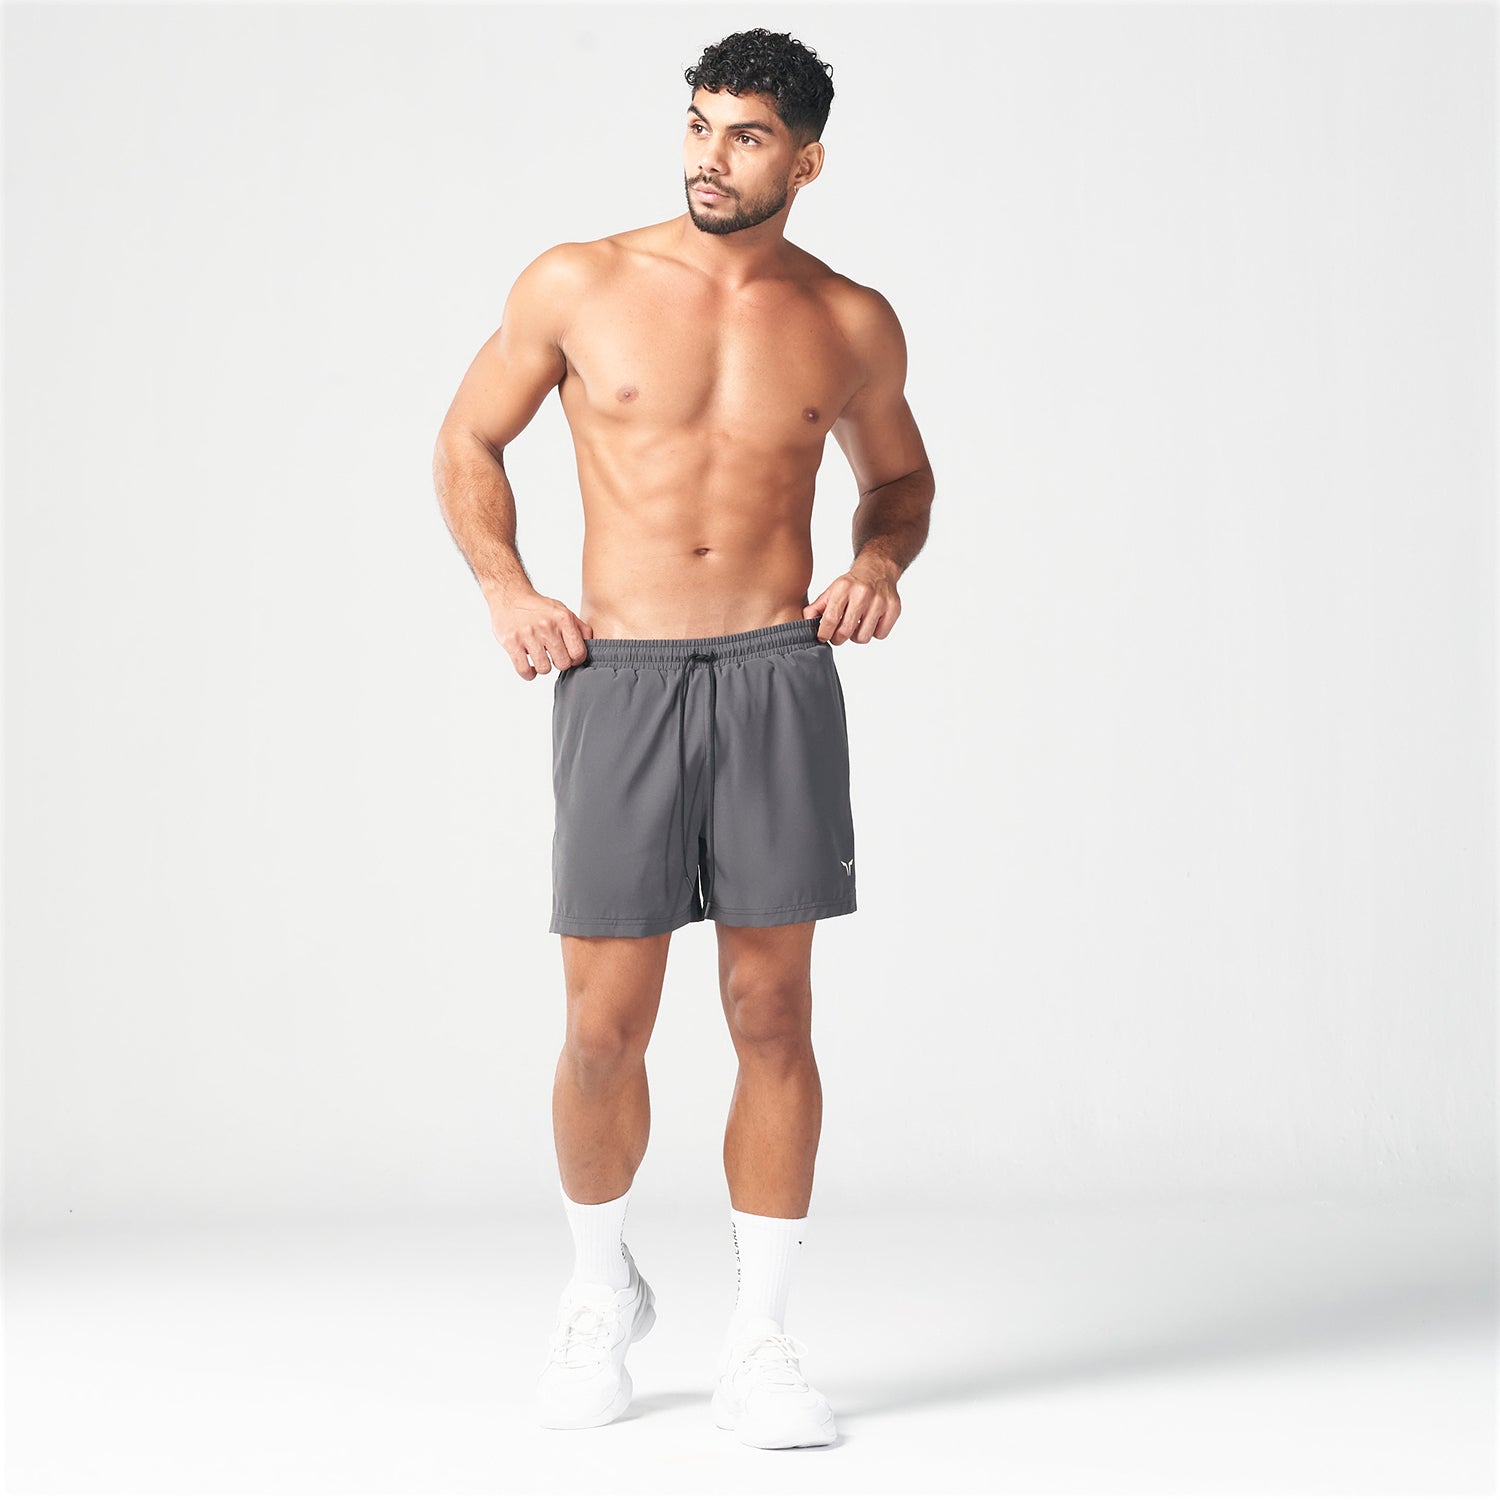 squatwolf-gym-wear-essential-5-inch-shorts-charcoal-workout-short-for-men